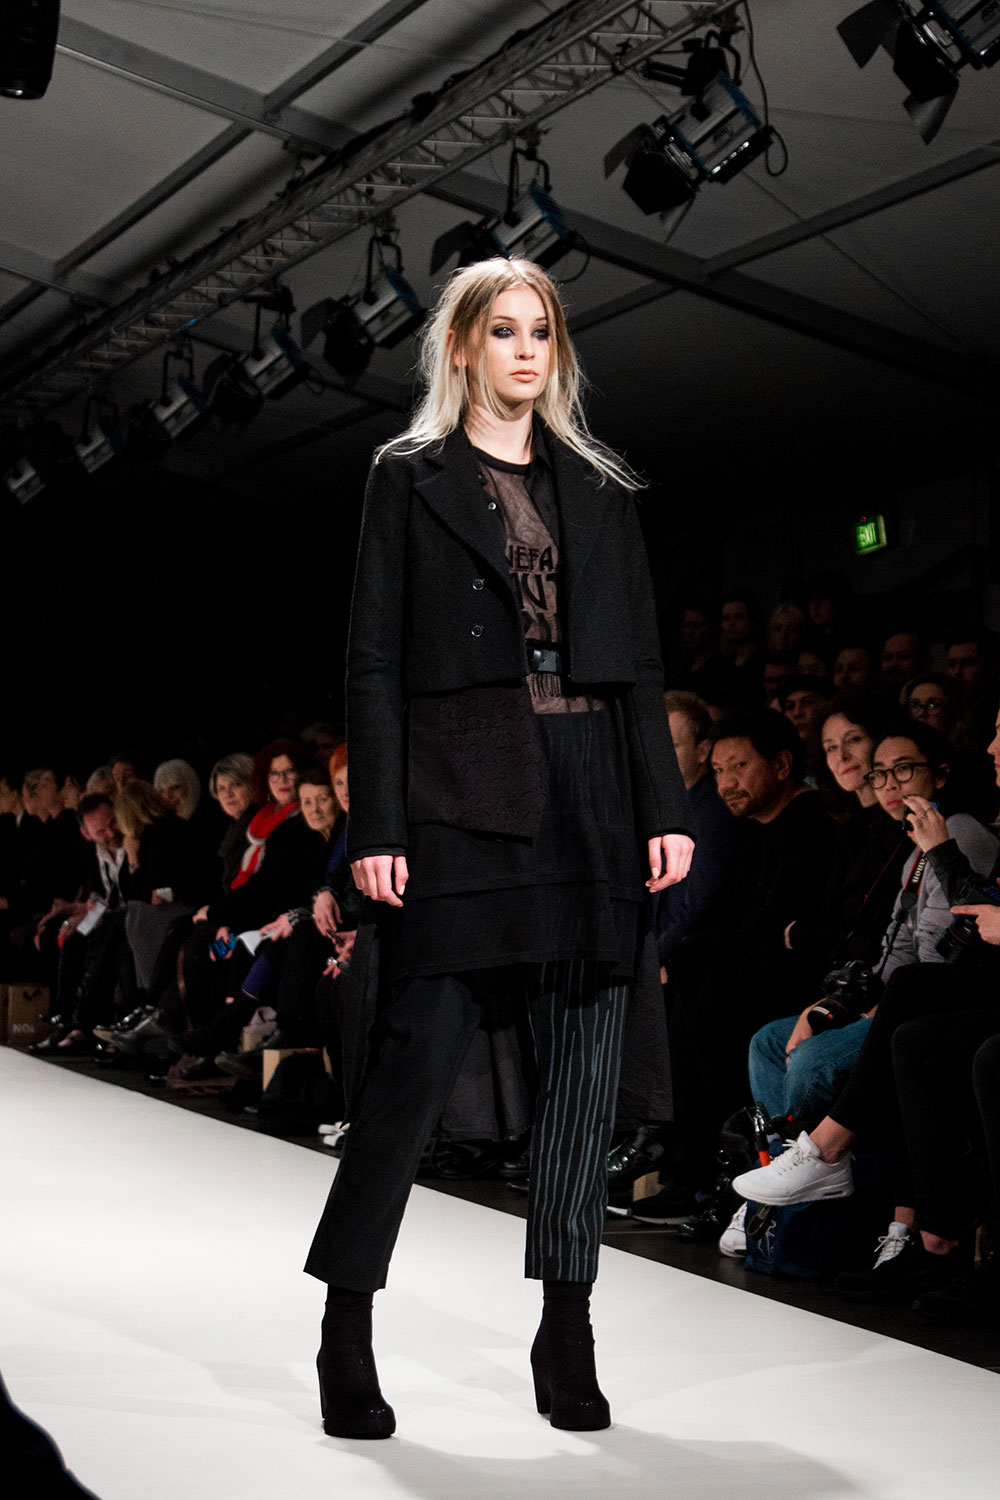 NOMd at NZFW 2015